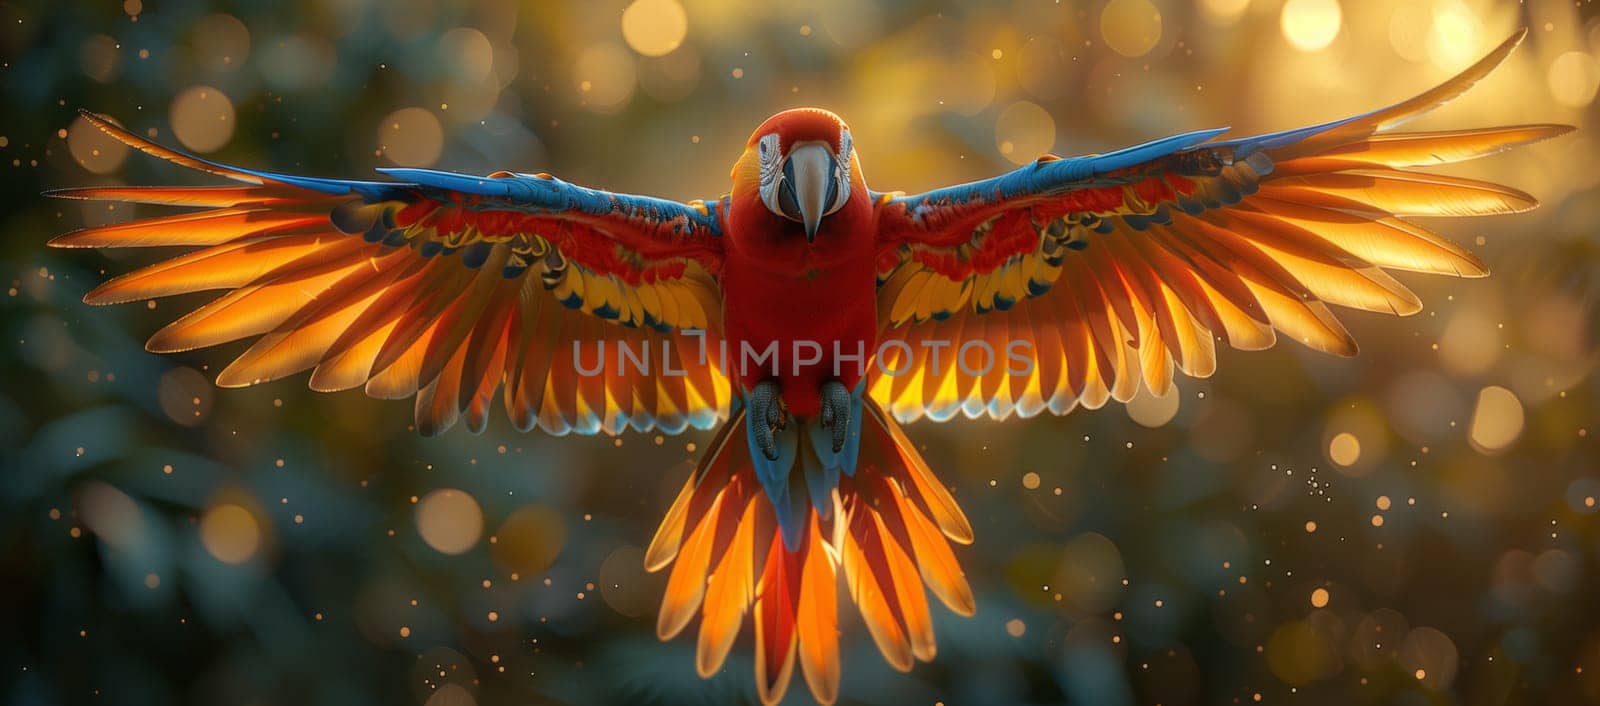 A vibrant parrot soars, displaying its colorful feathers in flight by richwolf